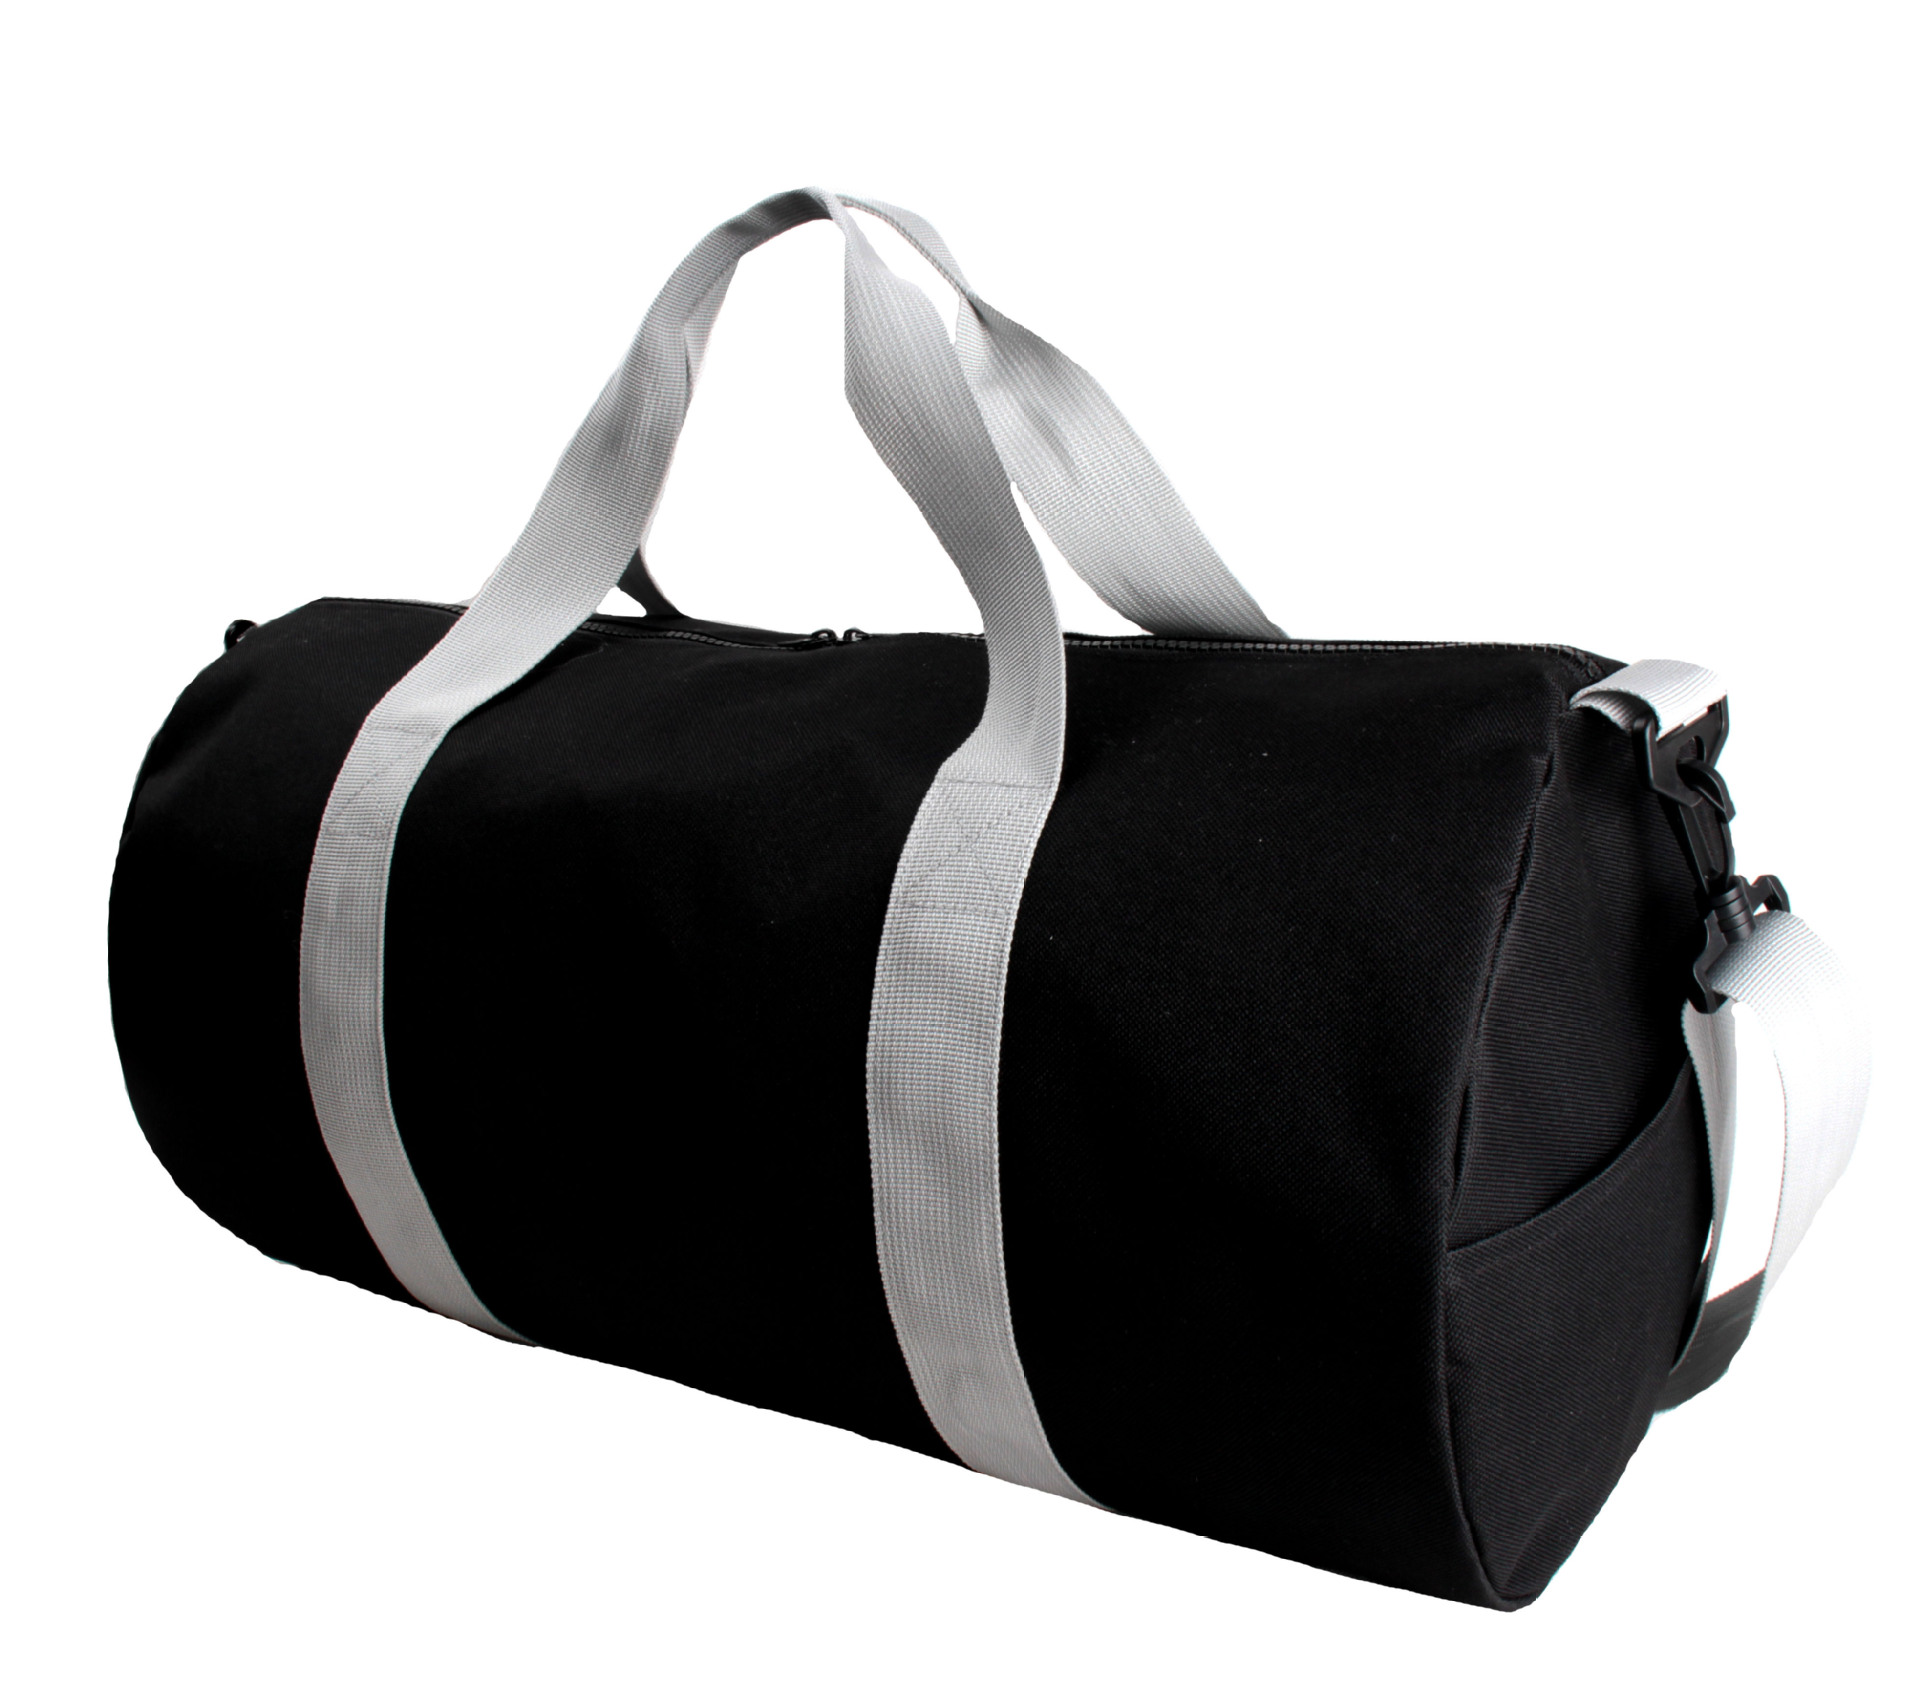 BT-0018 Aṣa tejede 600d polyester duffle apo